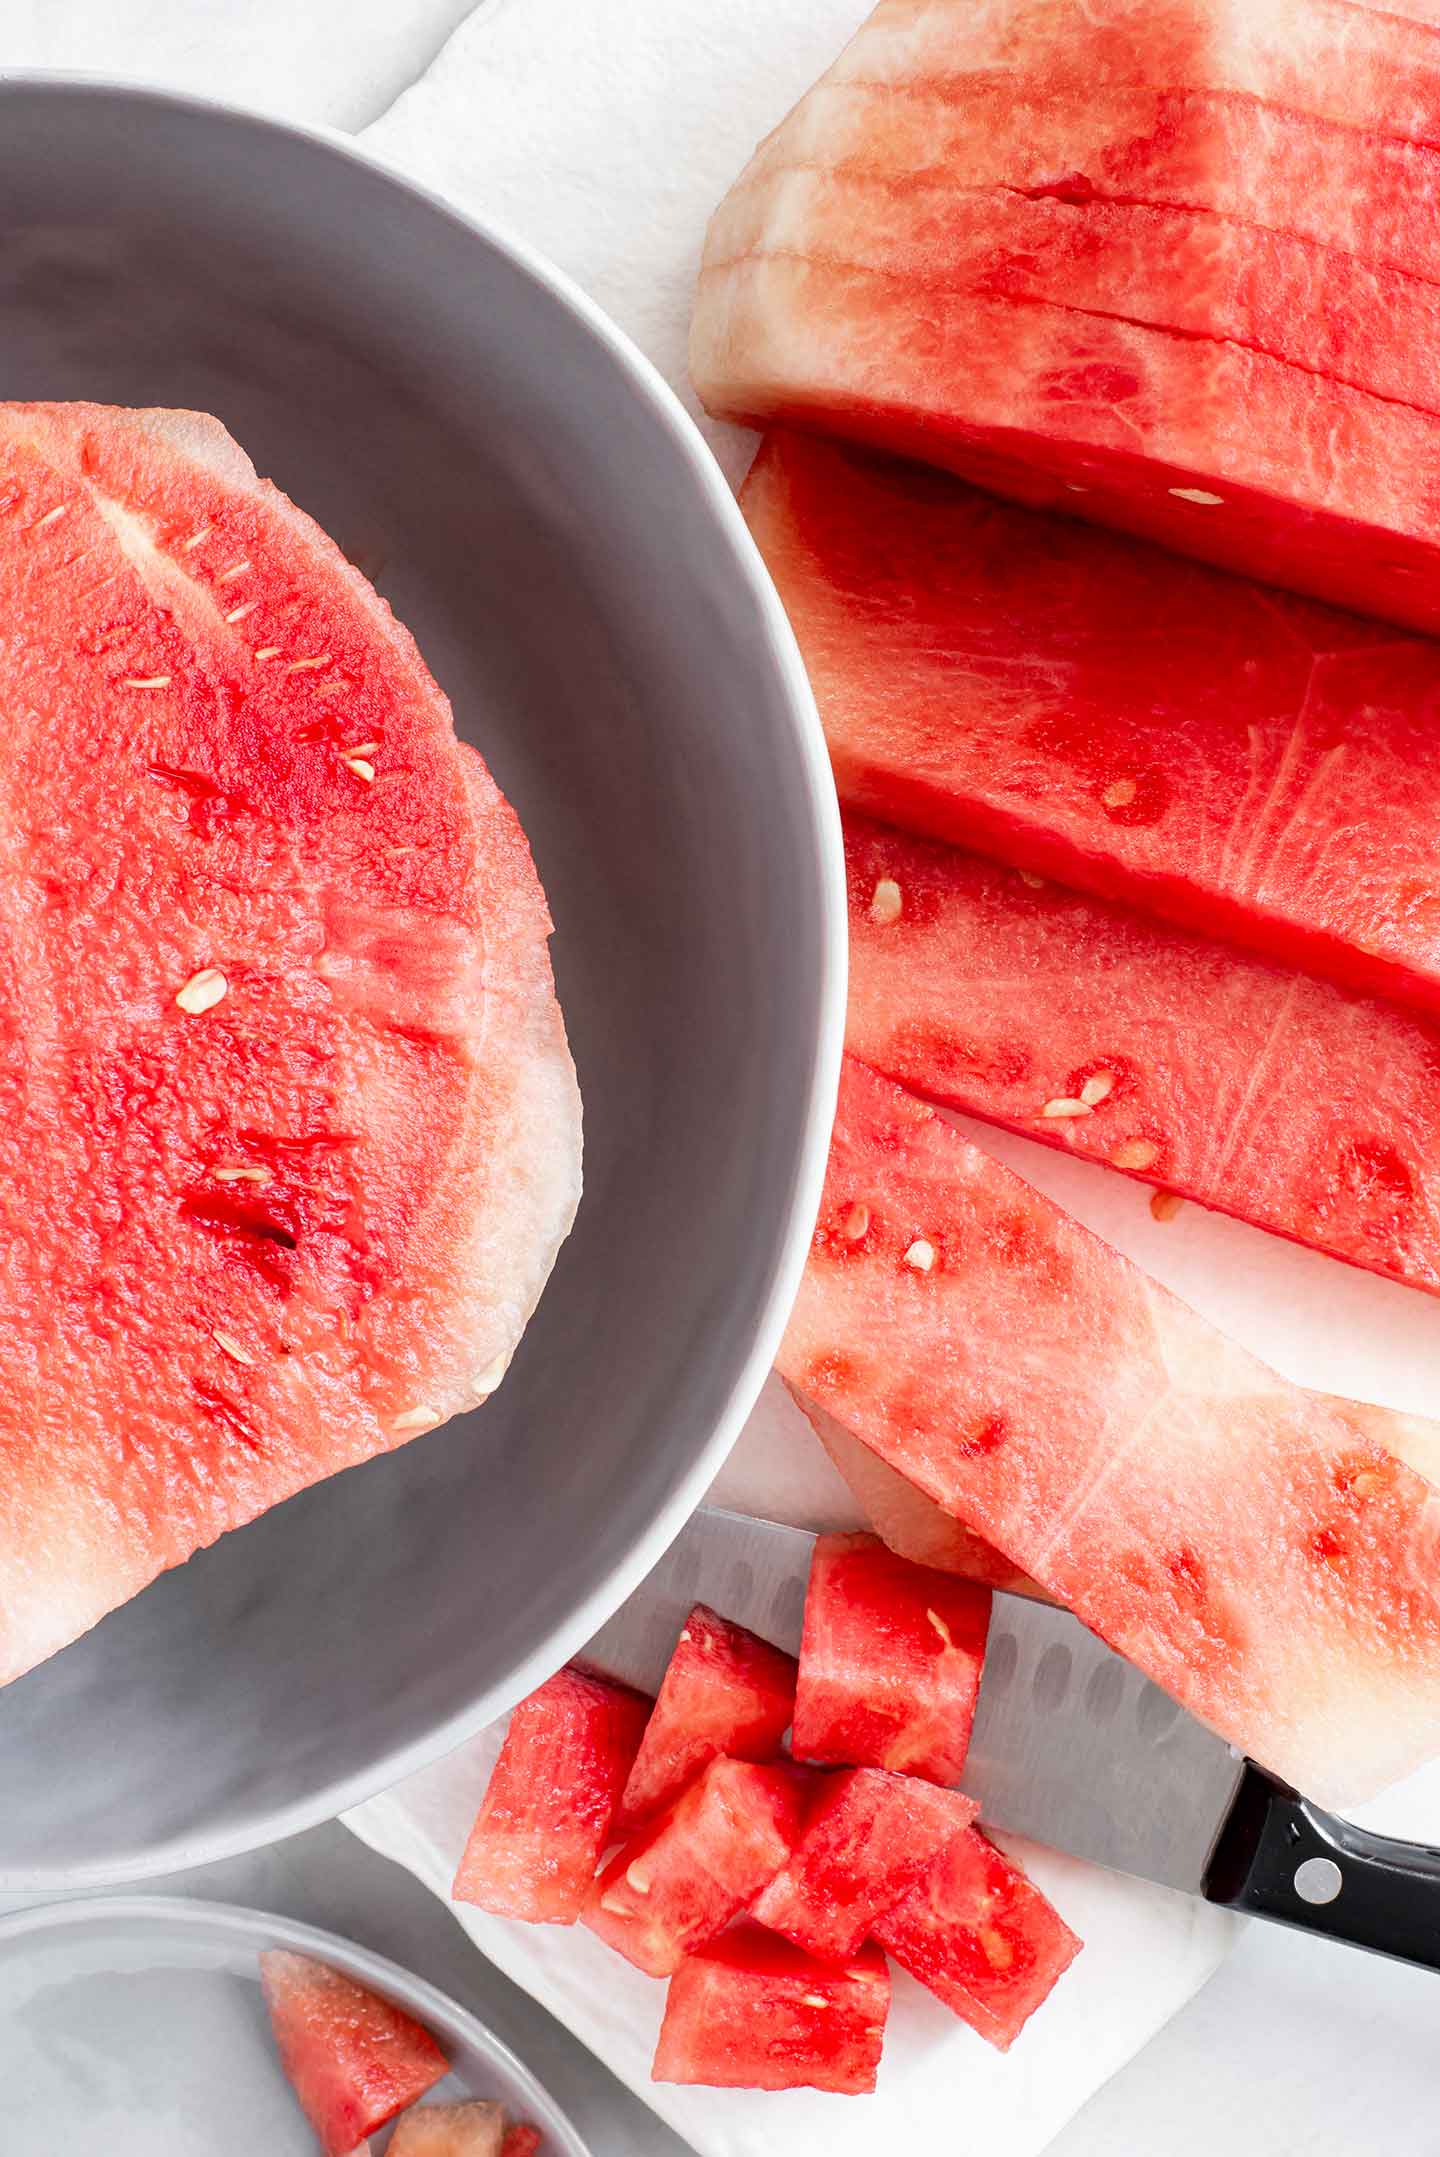 Top down view of a halved watermelon. Half is sliced into rectangular strips. A few pieces are diced into cubes.